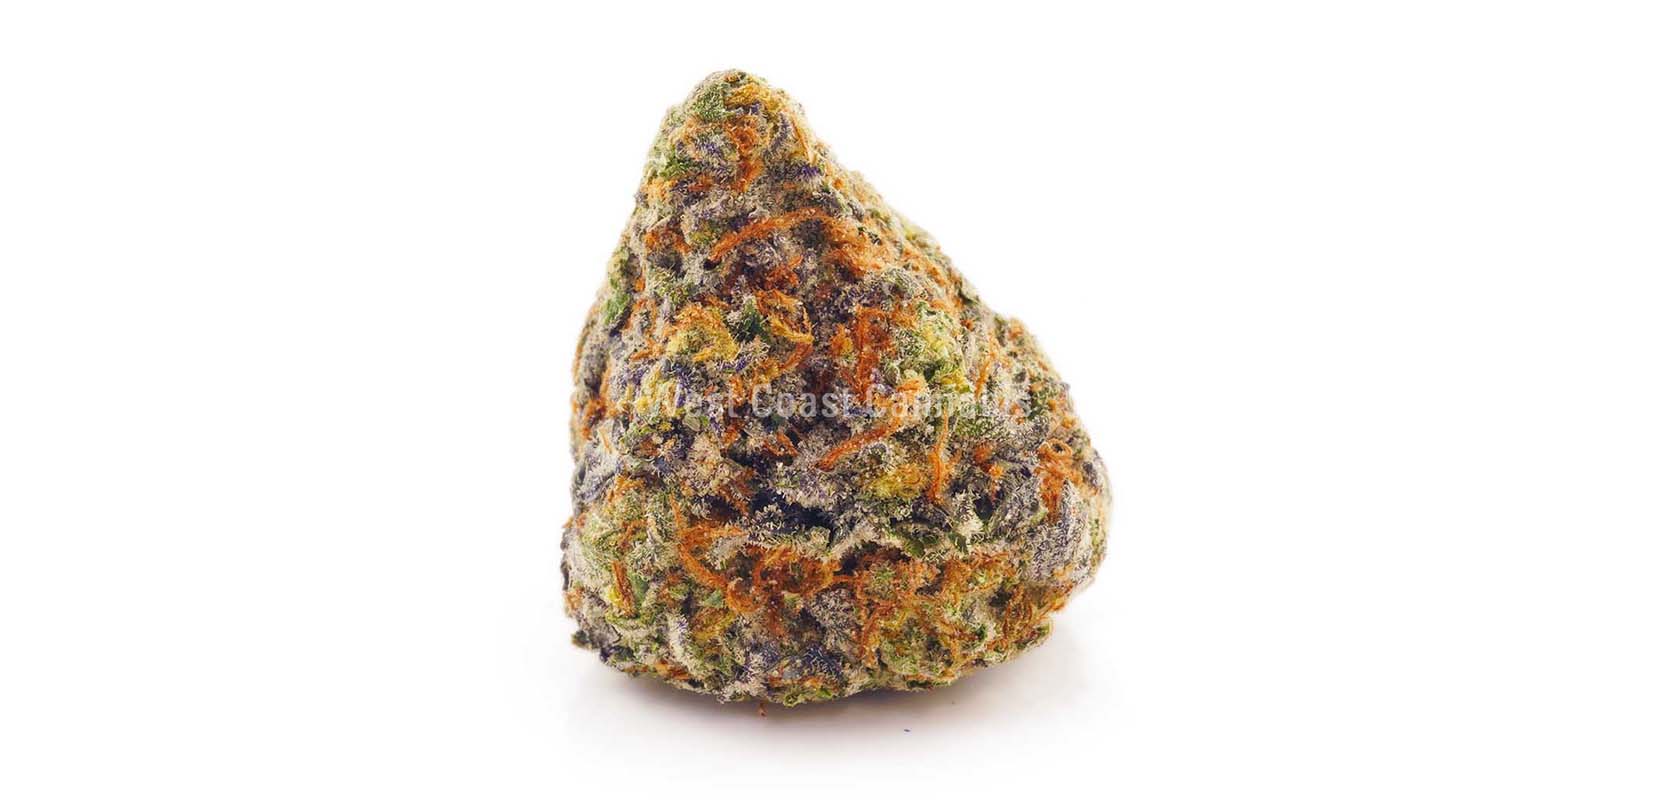 OG Kush mail order marijuana value buds from West Coast Cannabis online weed dispensary. Buy weed online Canada.